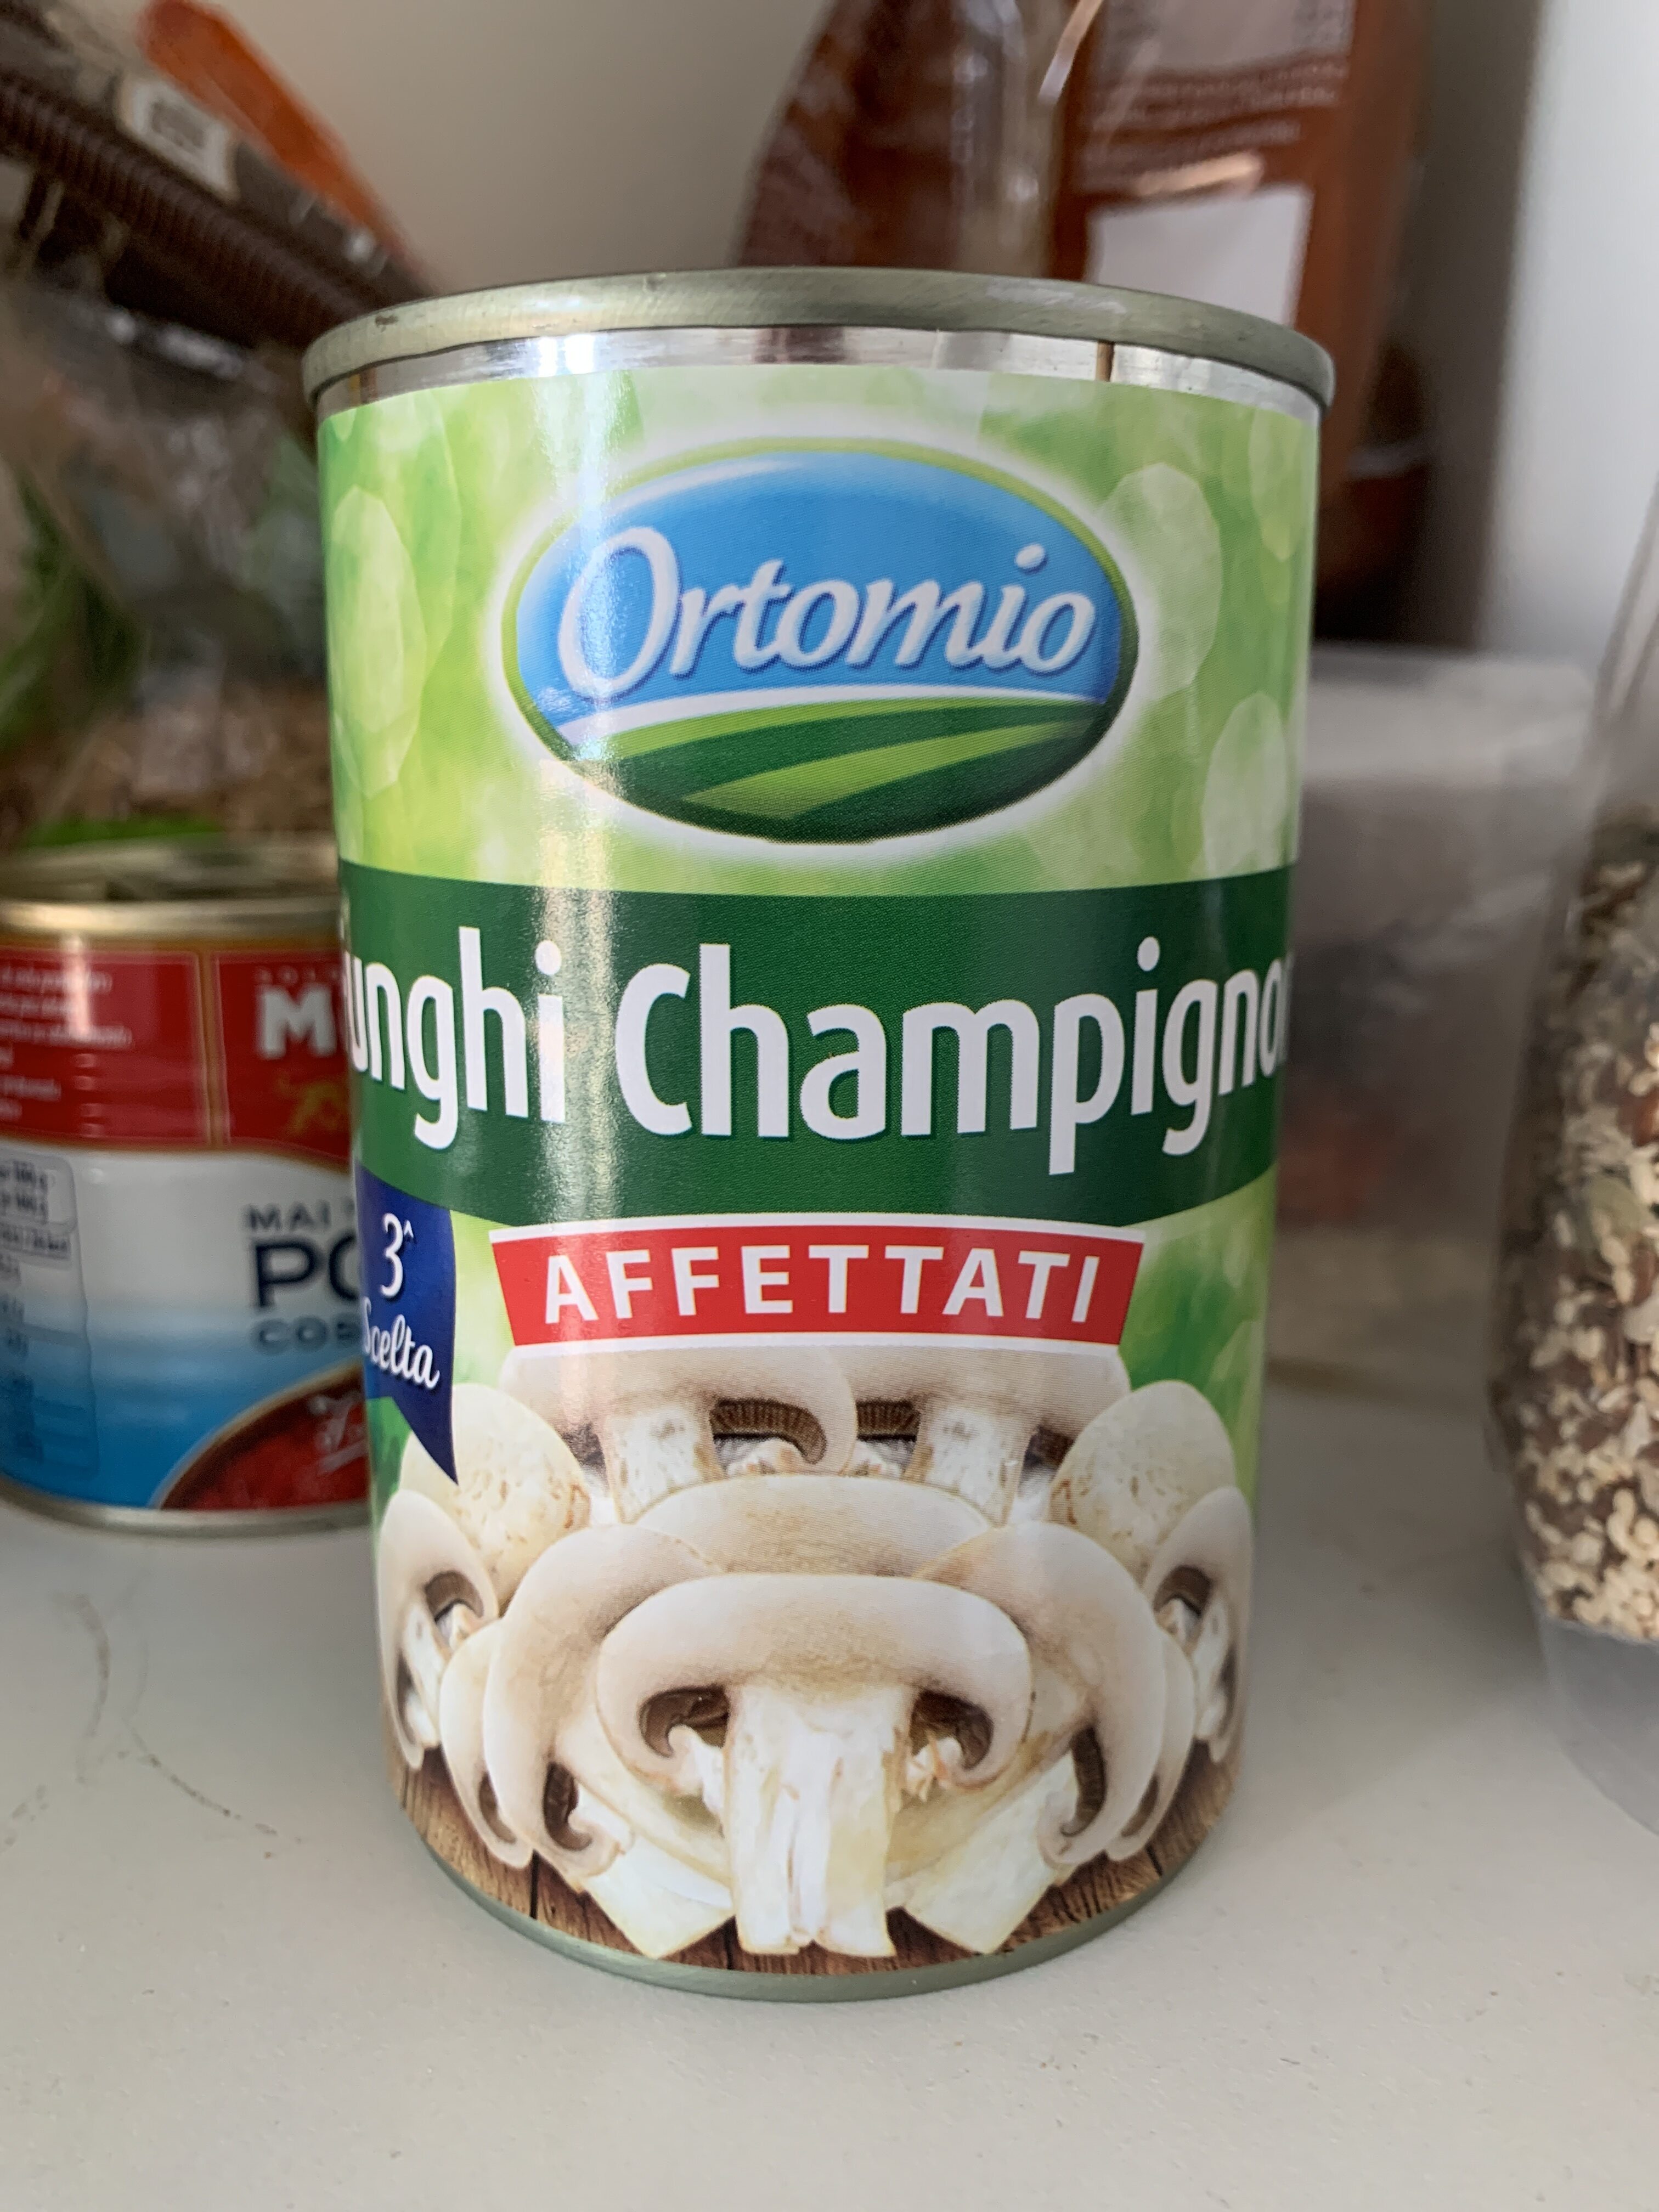 Funghi champignons - Product - it